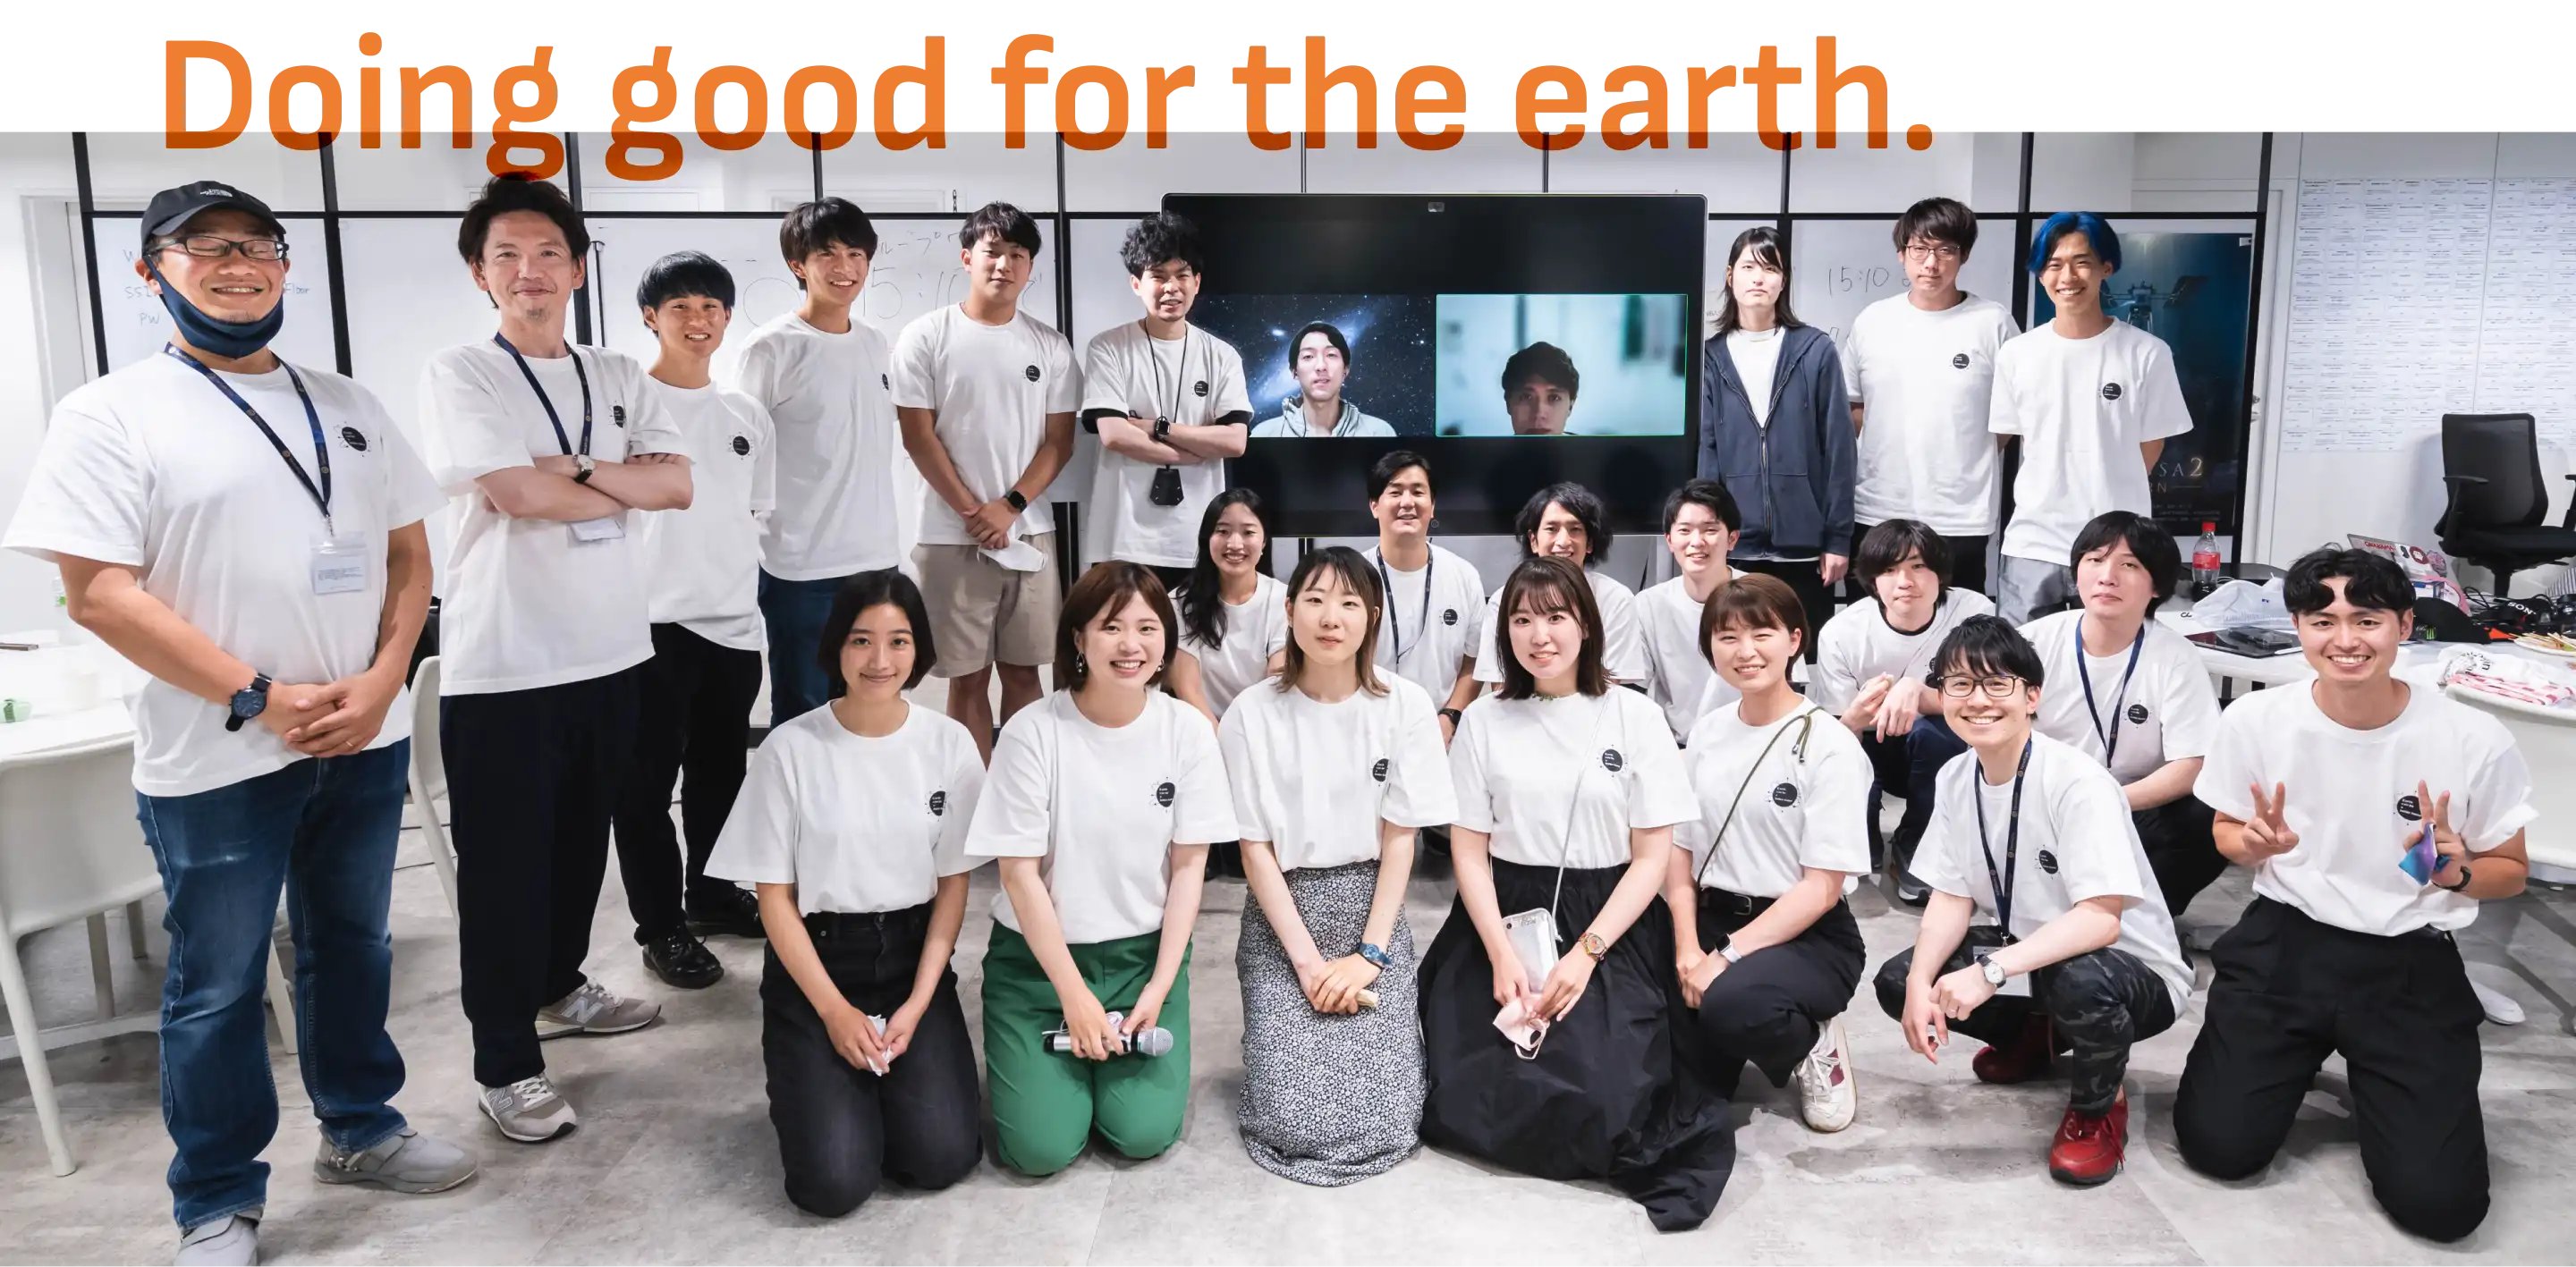 Doing good for the earth.